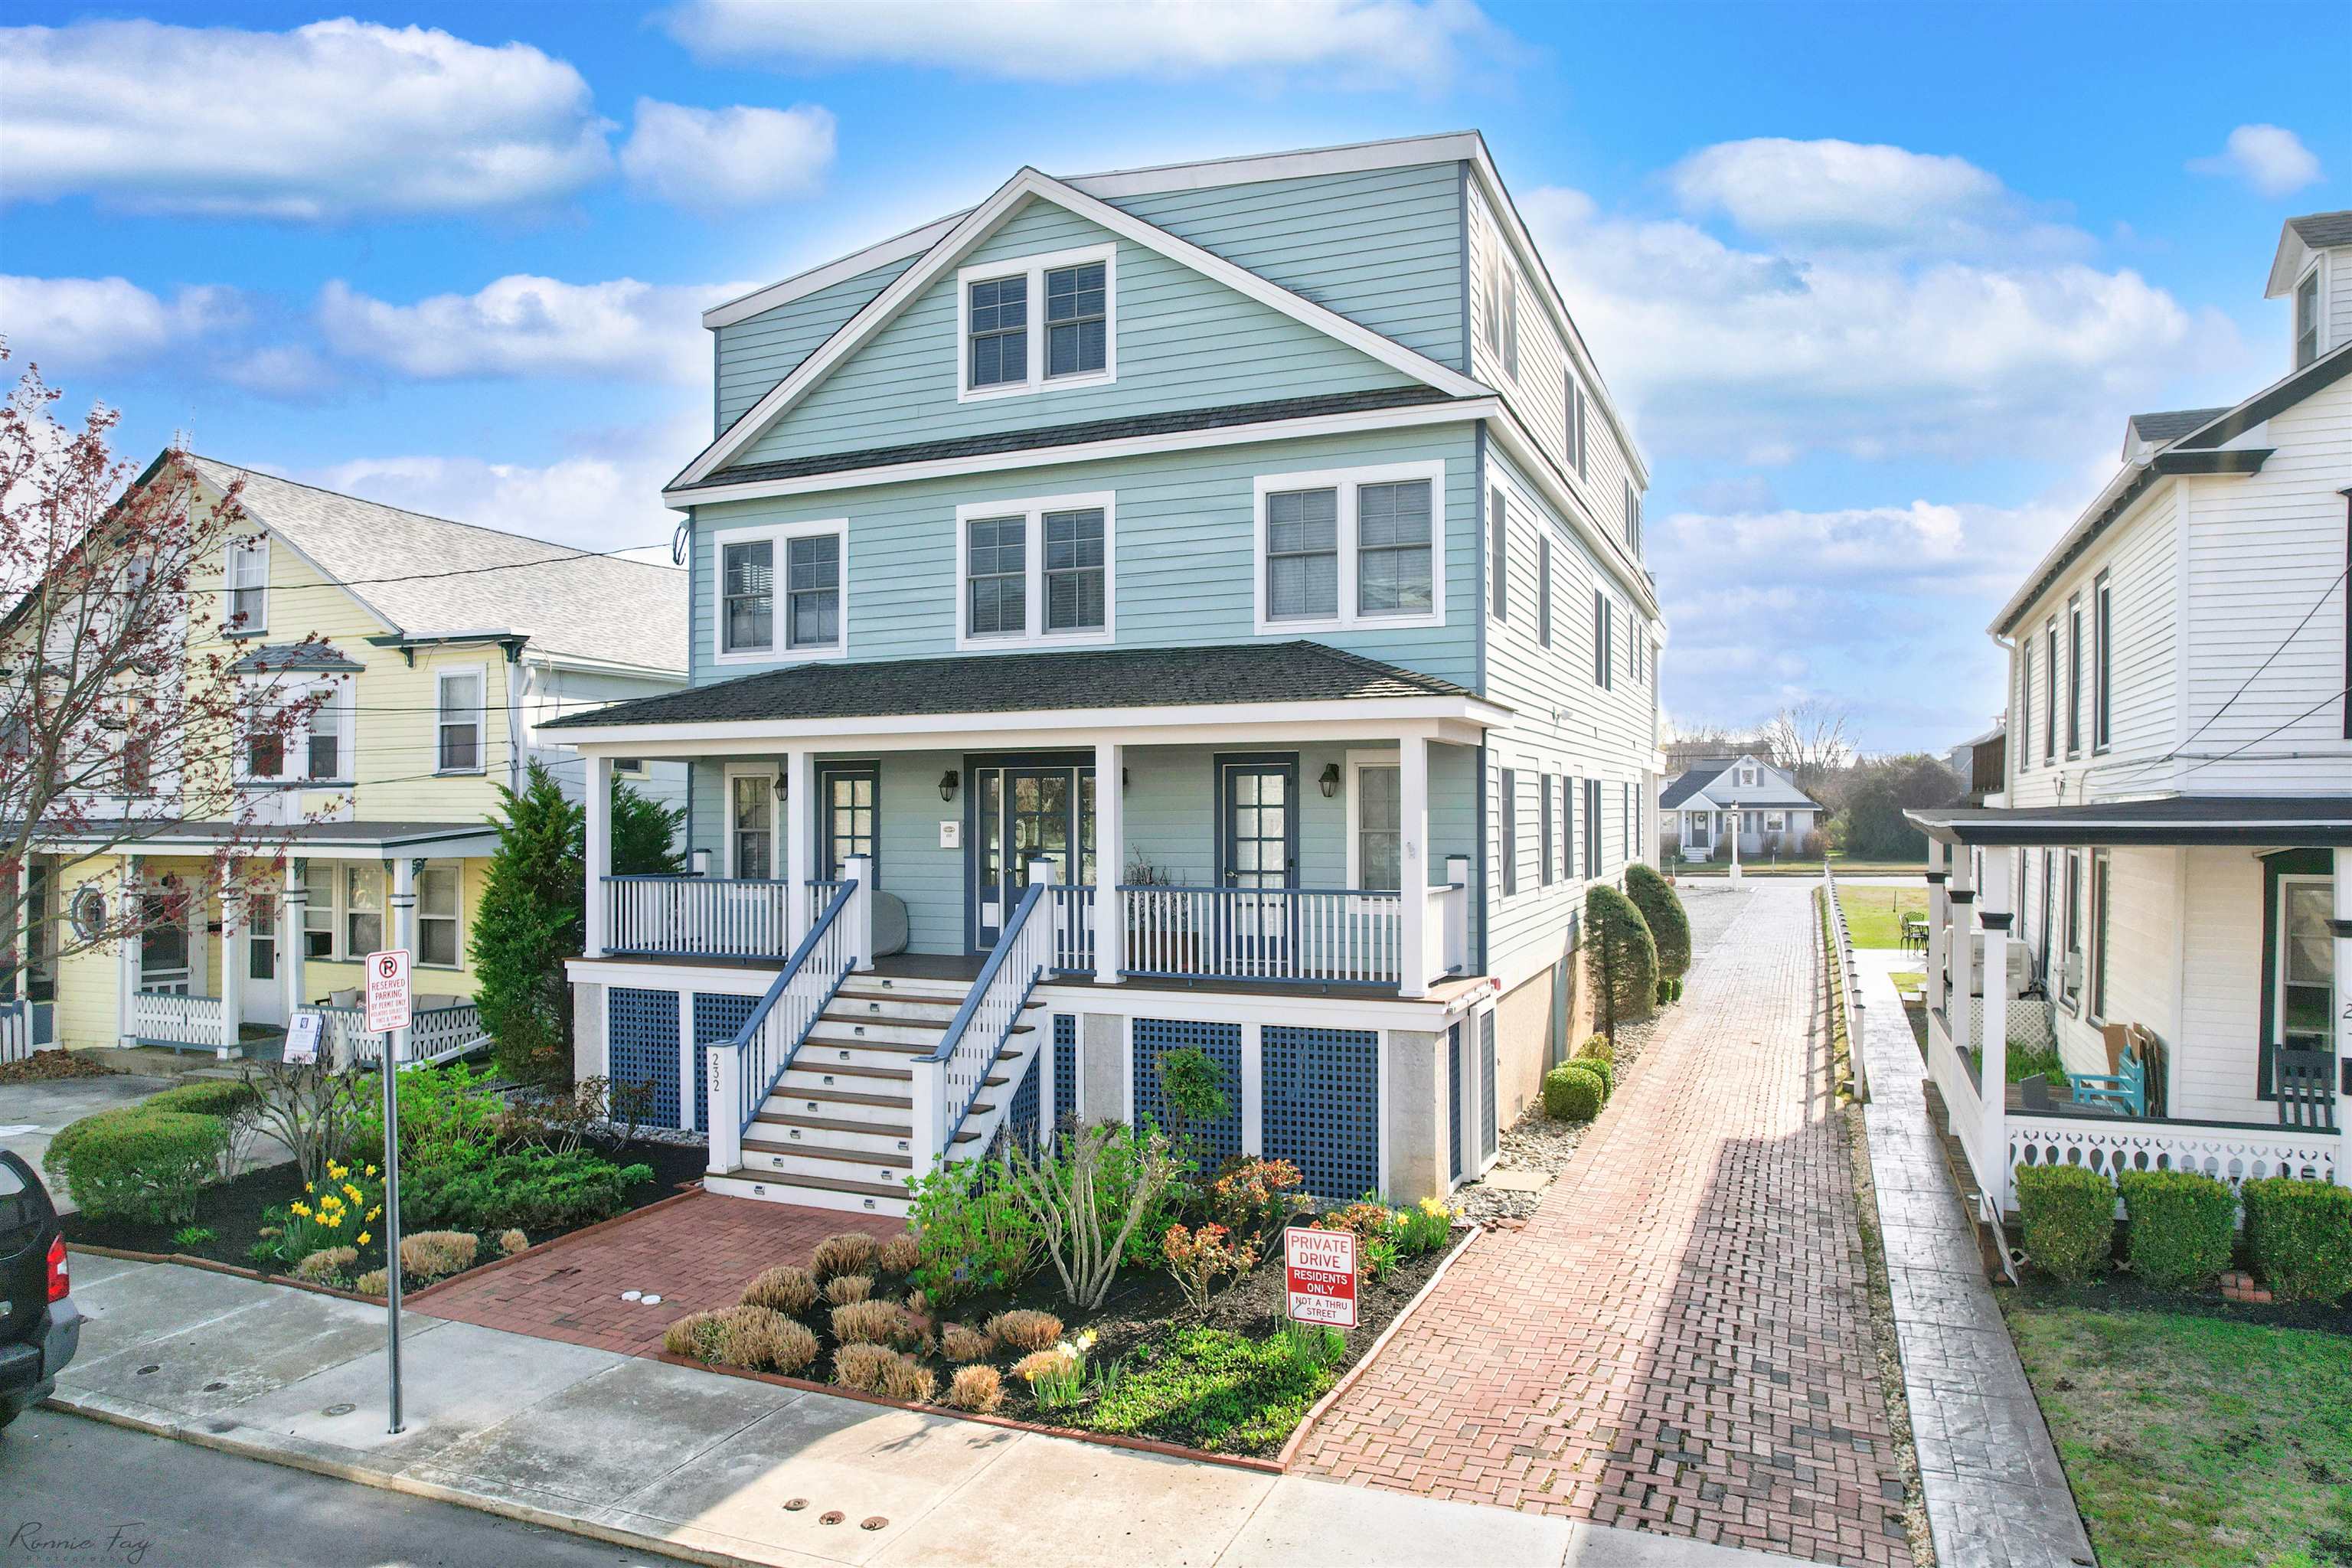 402 Lincoln Avenue in Cape May Point